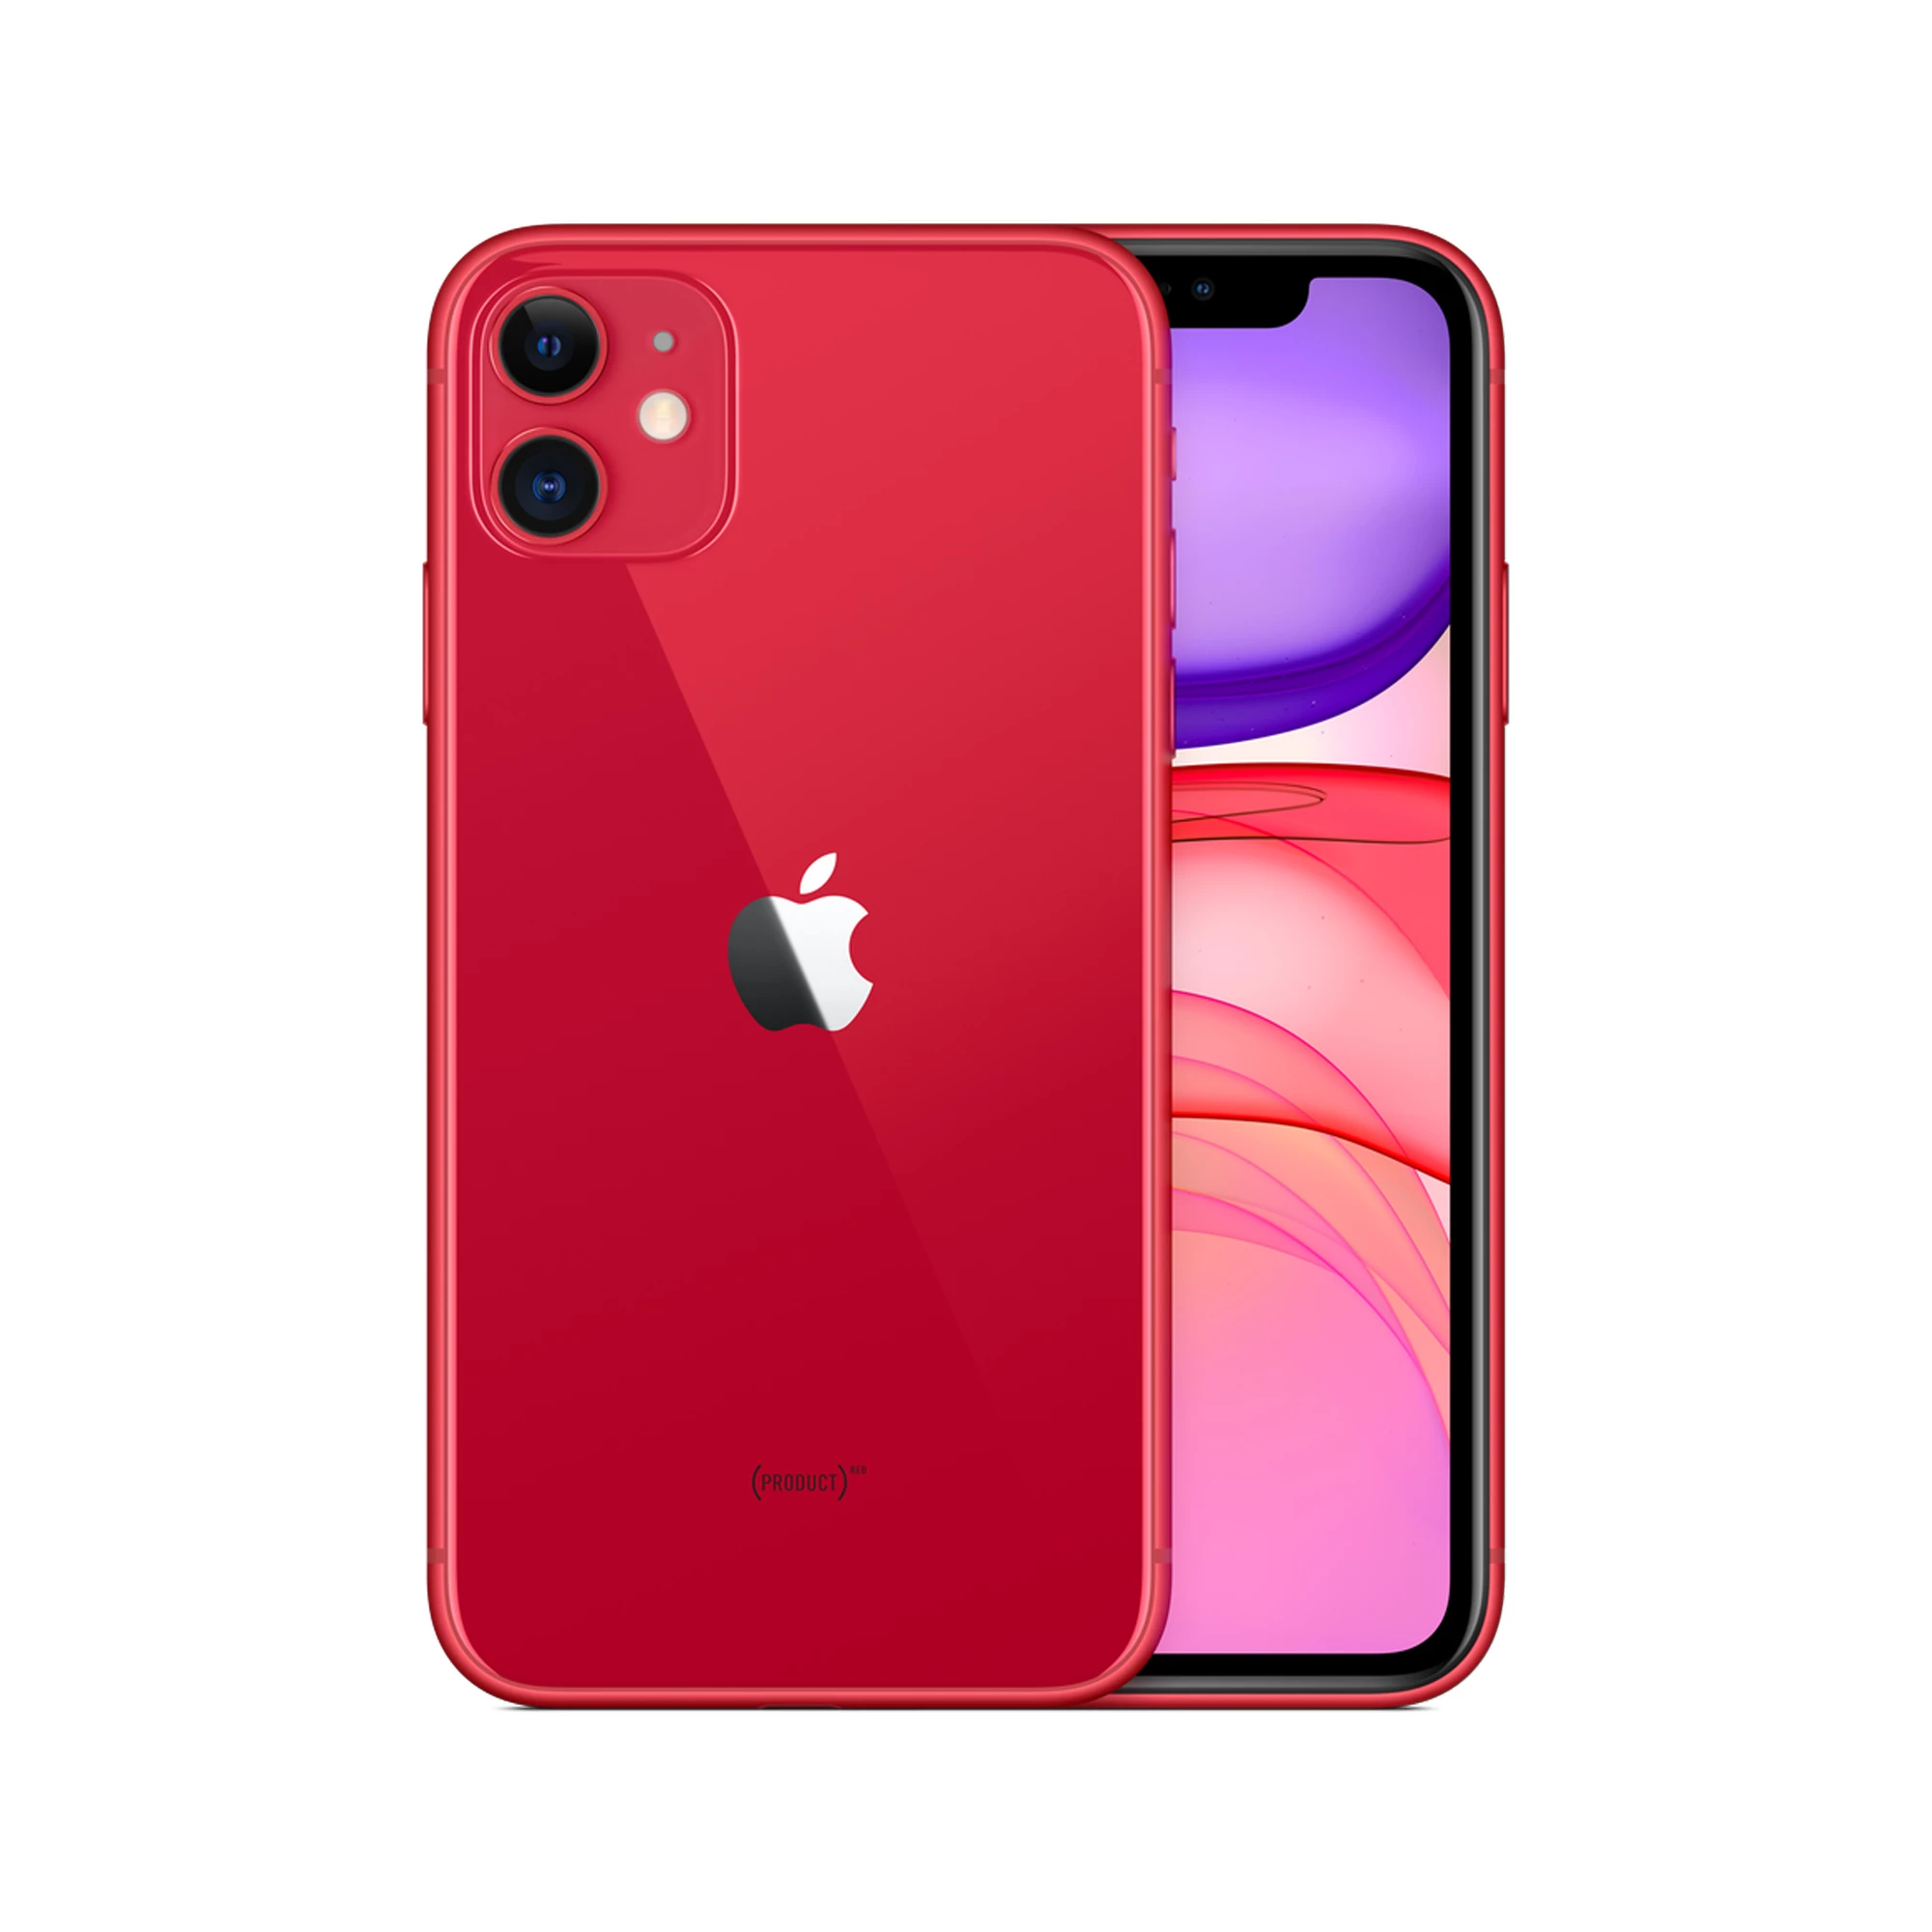 Apple iPhone 11 256GB Product (RED) (MHD63, MHDR3) Slim Box